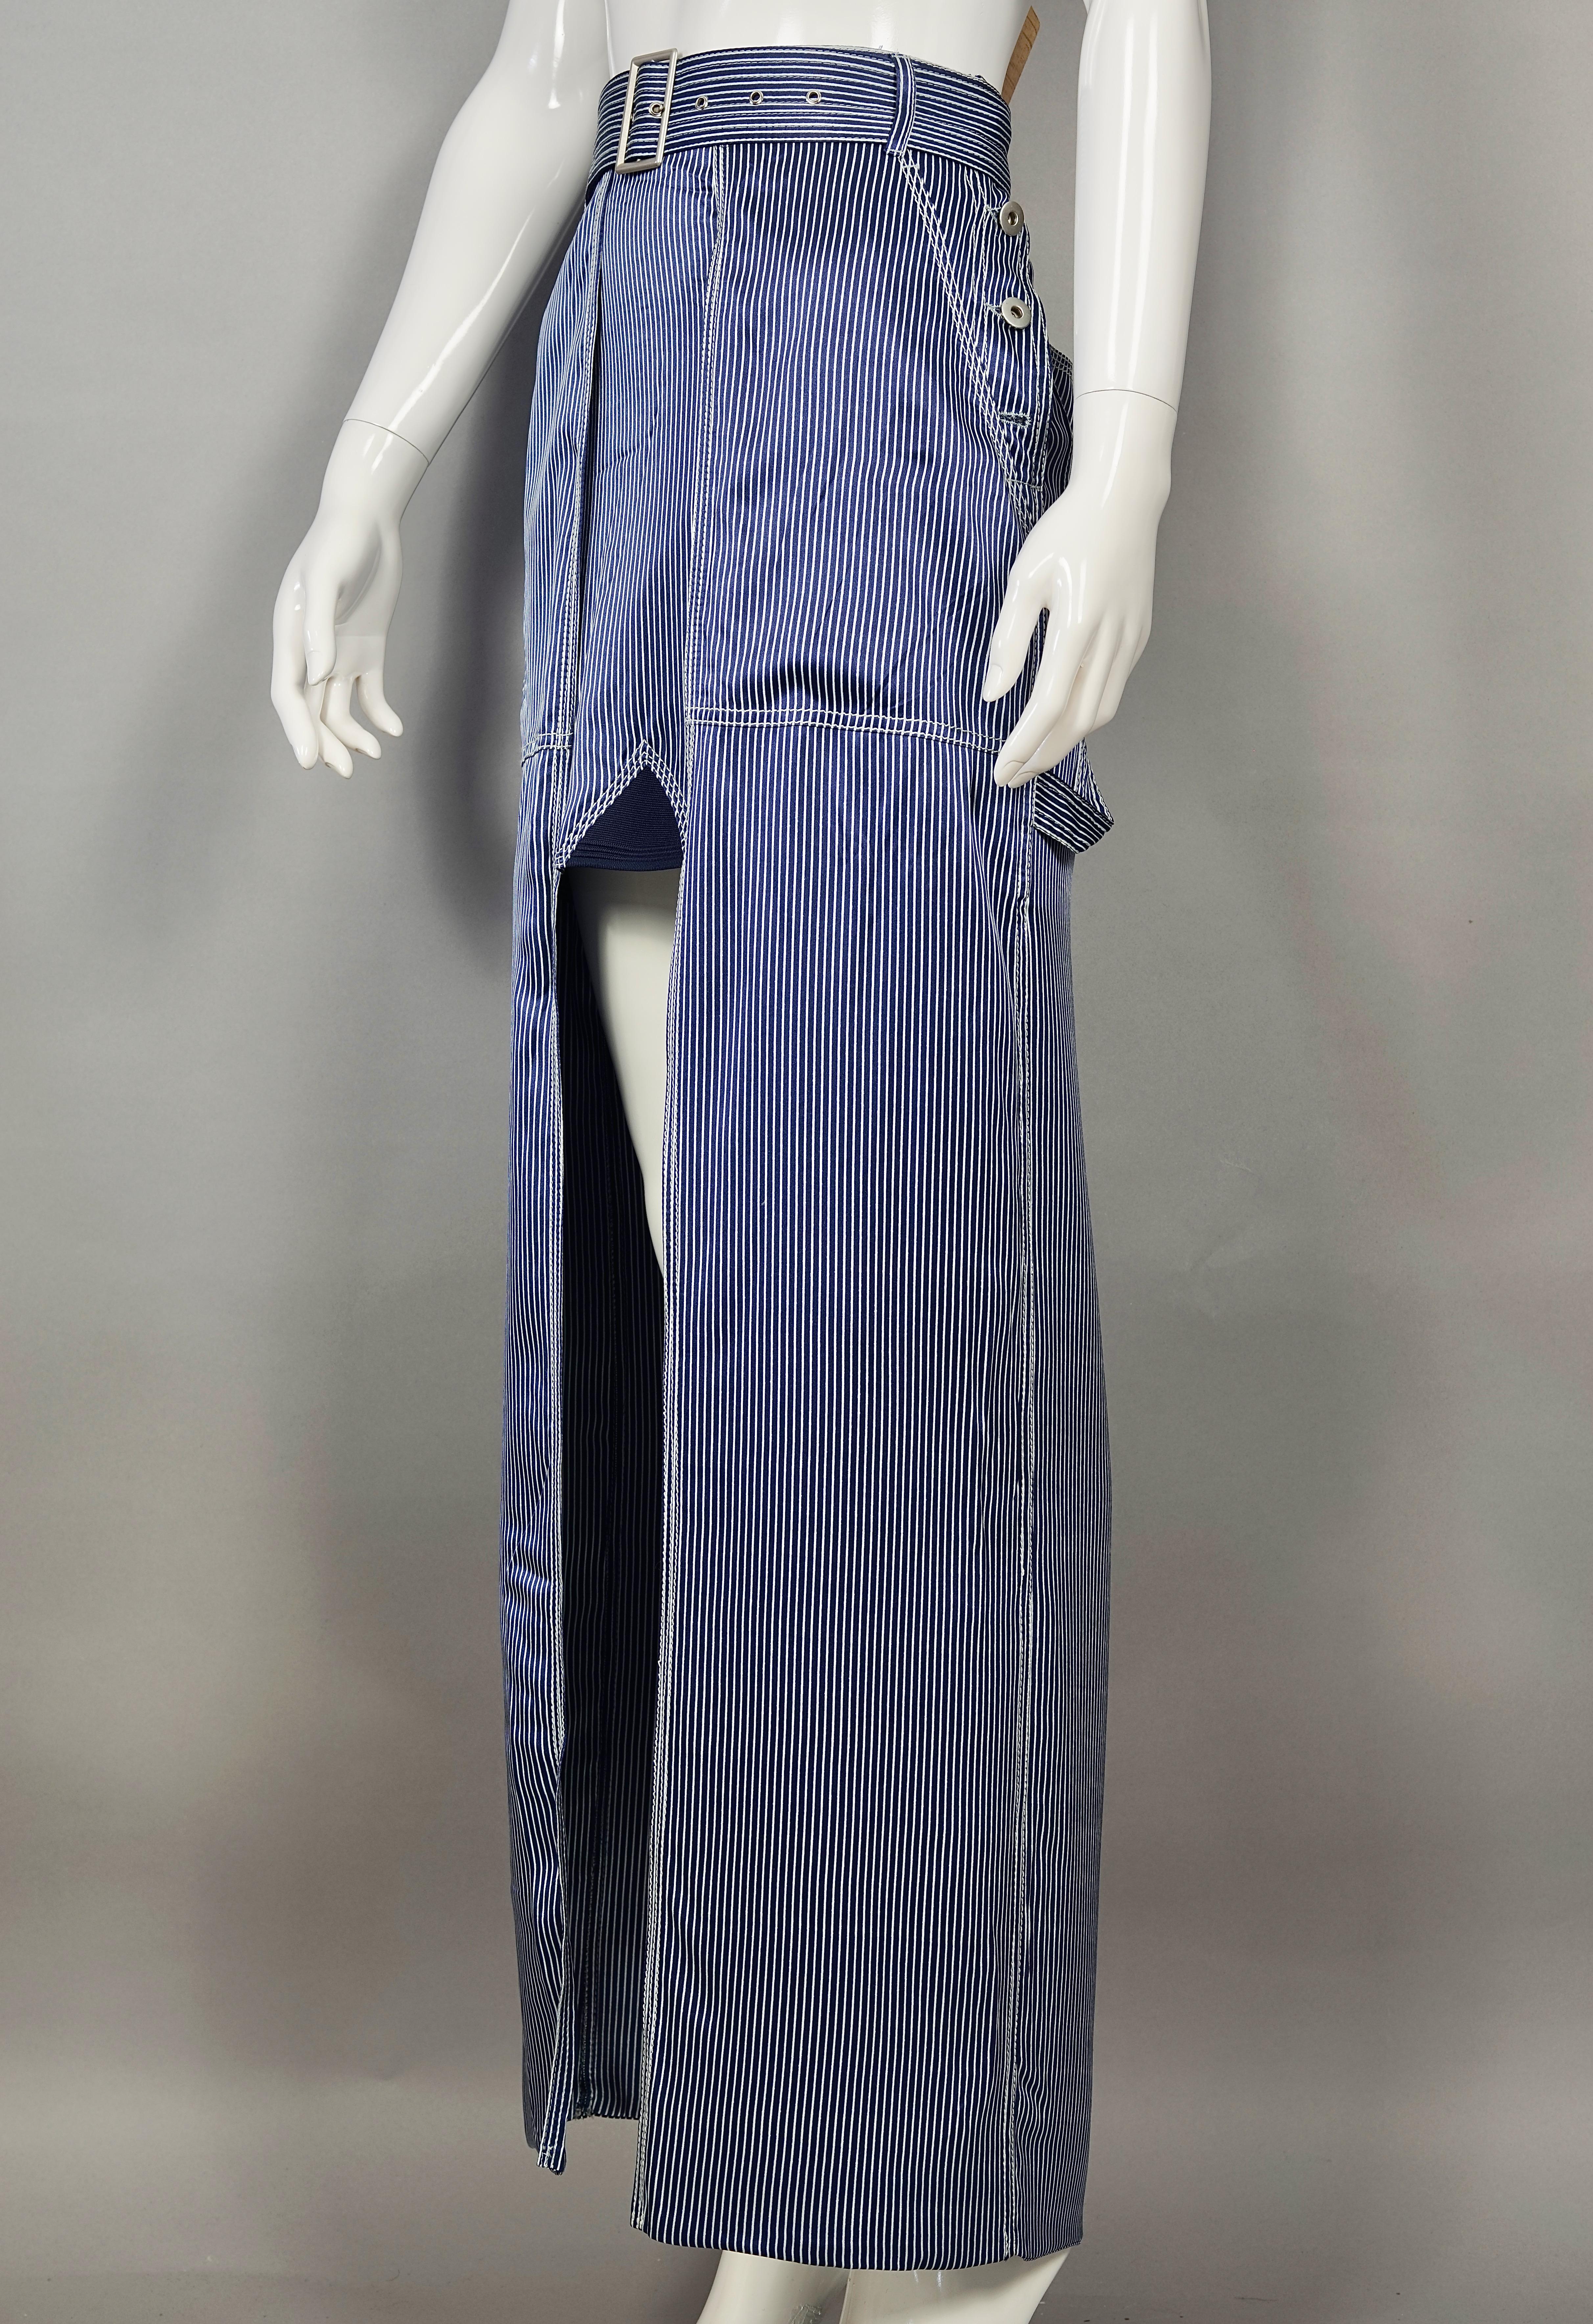 Vintage JEAN PAUL GAULTIER Silk High Low Stripe Belted Skirt

Measurements taken laid flat, please double waist and hips:
Waist: 15.94 inches (40.5 cm) adjustable with belt
Hips: 19.29 inches (49 cm) not stretched
Length: 43.30 inches (110